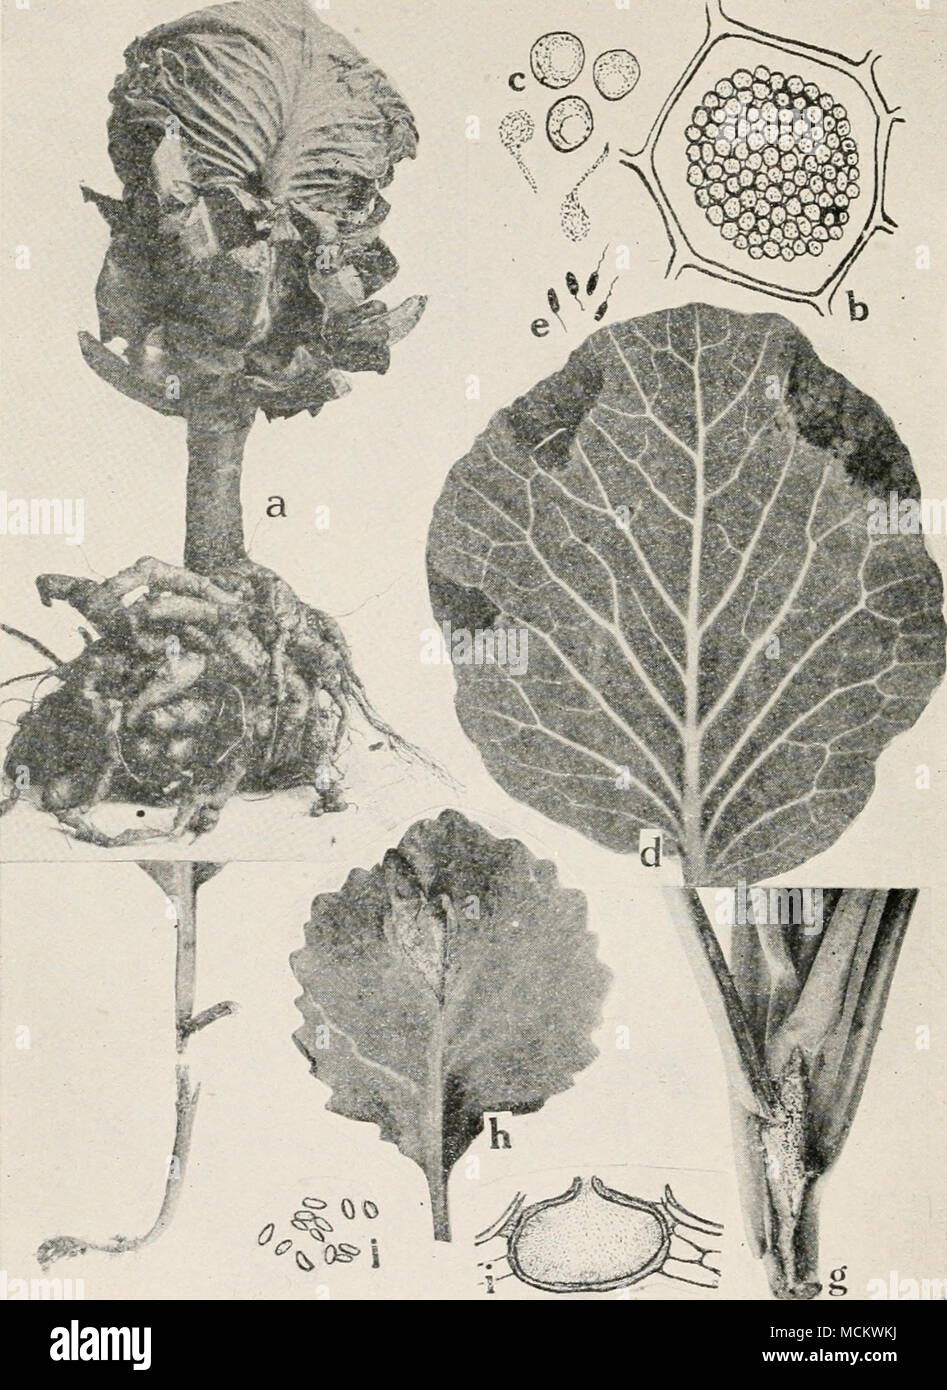 . Fig. 30. Cabbage Diseases. a. Club root (after Cunningham), b. cell filled with spores of the club root or- ganism, c. spores and swarm spores of Plasmodiophora brassica (b. and c. after Chuff), d. black rot of cabbage (after F. C. Stewart), c. individual black rot germs of Pseudomonas campeslris, f. black-leg on young cabbage seedling, g. black-leg lesion on foot of older cabbage plant, h. black-leg lesion on cabbage leaf, i. pycnidium of Phoma oleracecE.j. pycnospores of P. olcracece (i. a.ndj. after Manns), Stock Photo